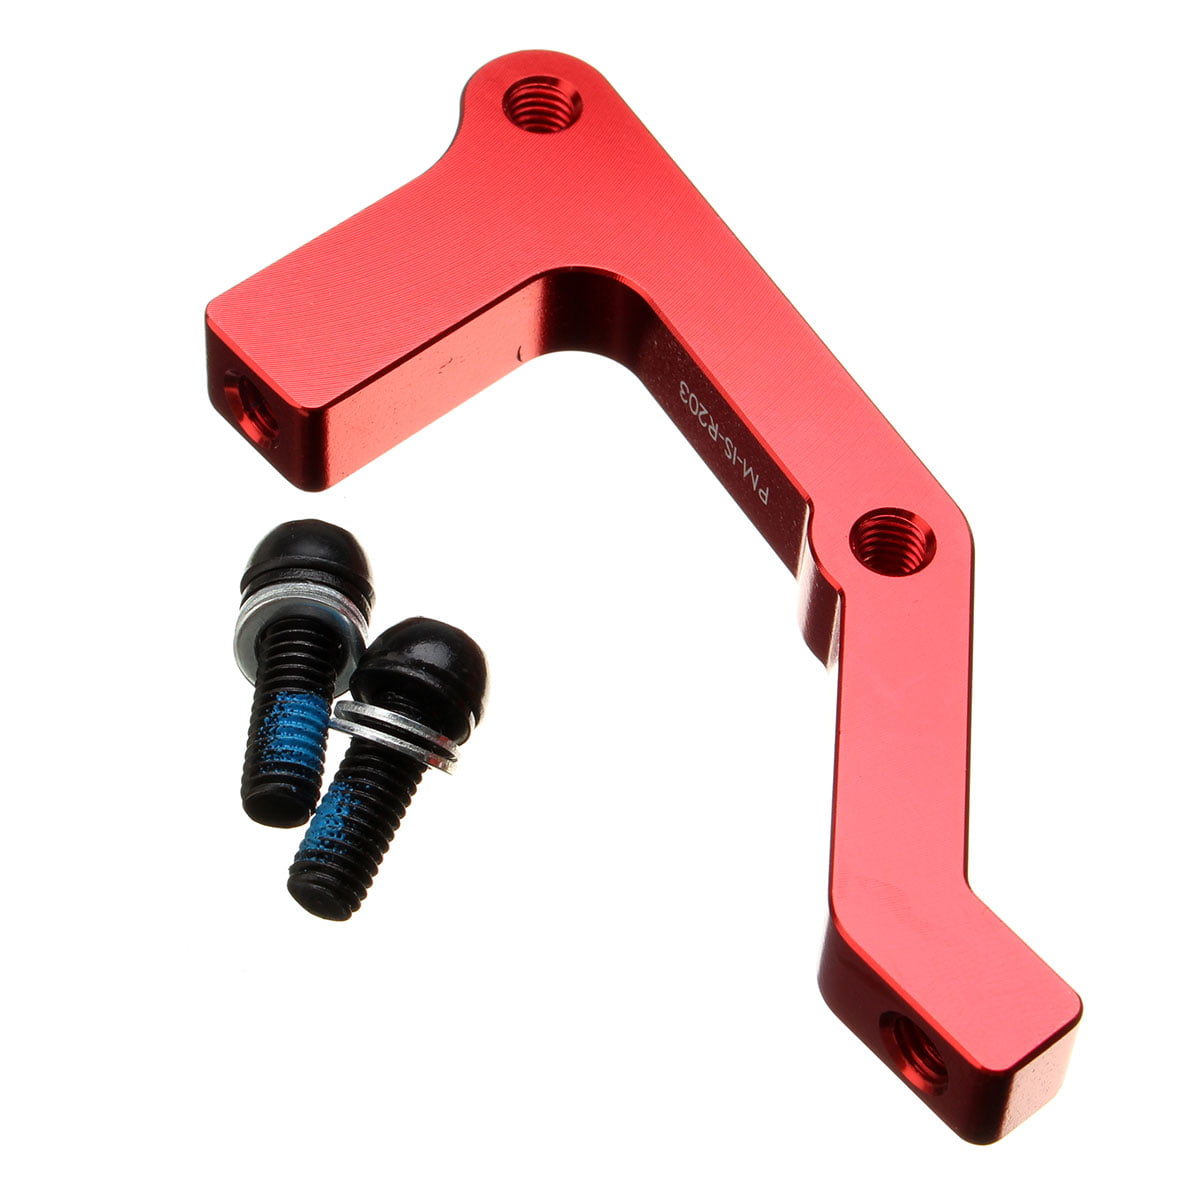 Ultralight Disc Brake Adapter Front 203mm IS Fork to POST PM Brake Caliper RED